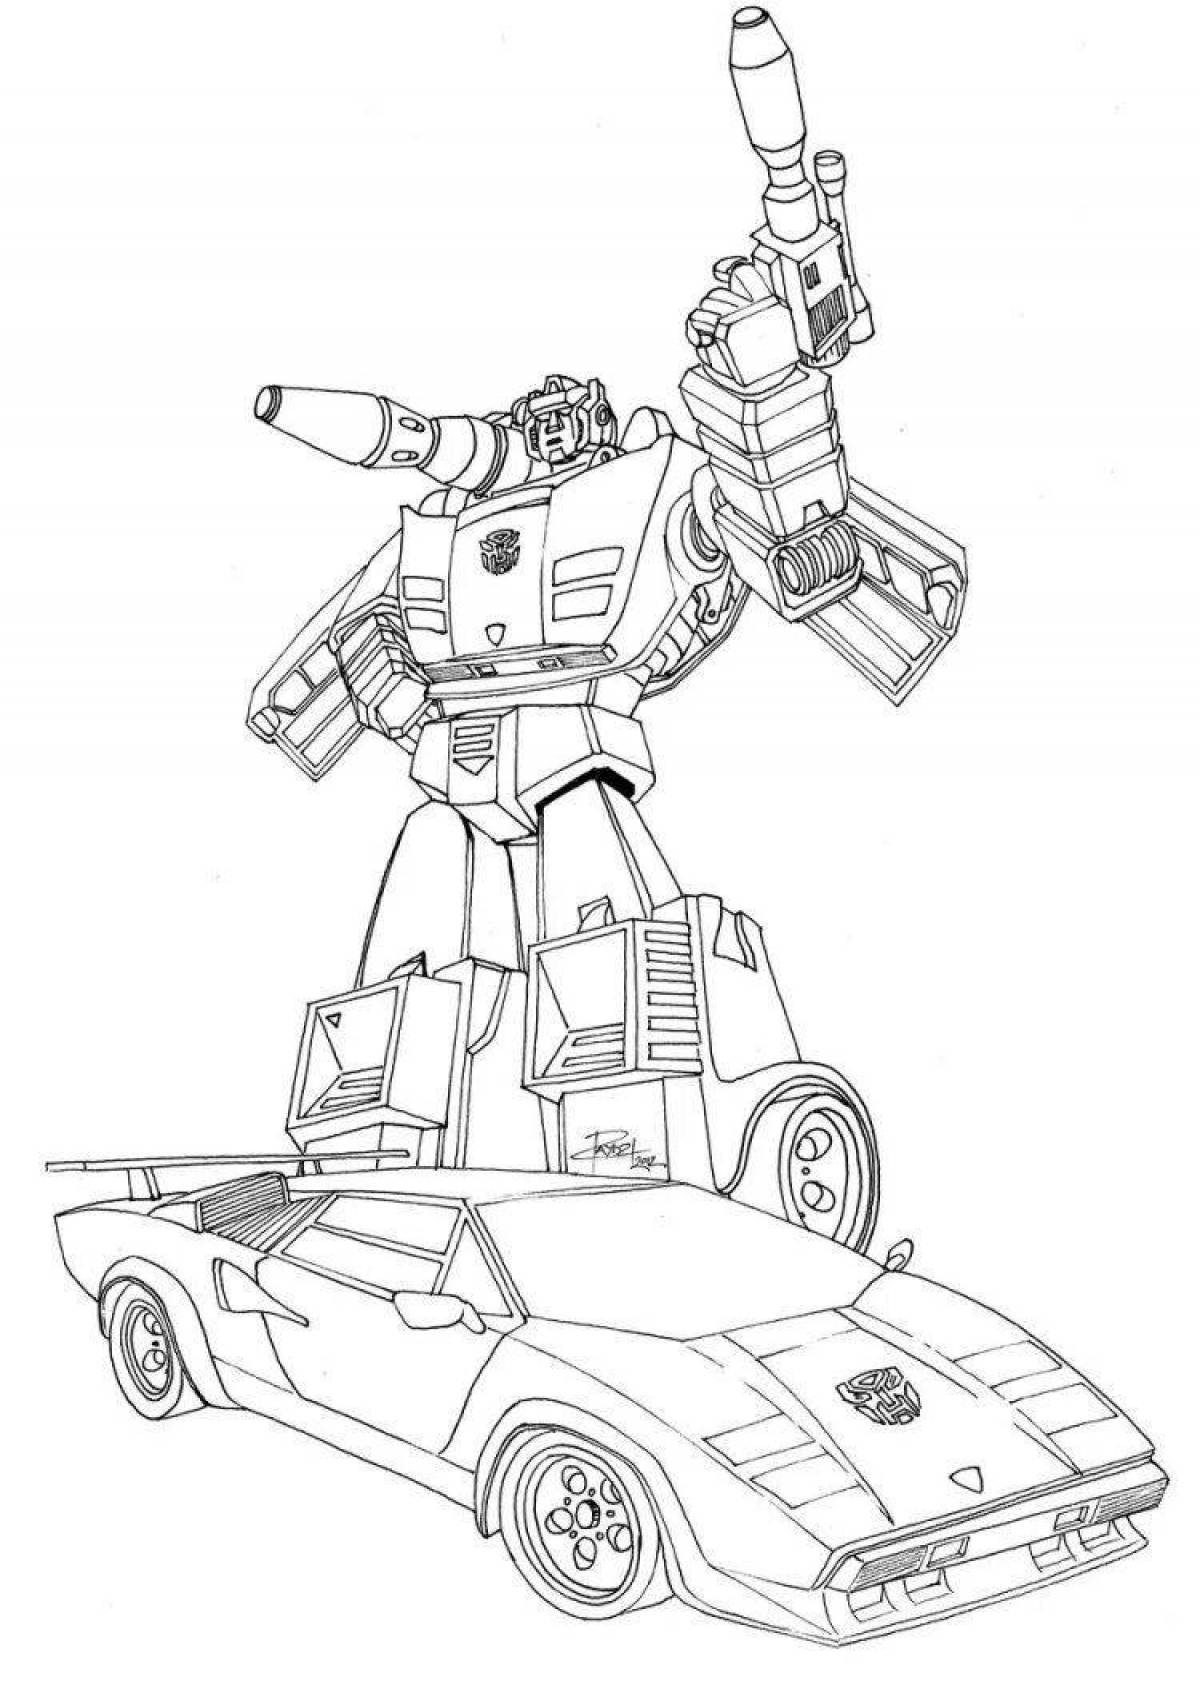 Animated cars transformers coloring book